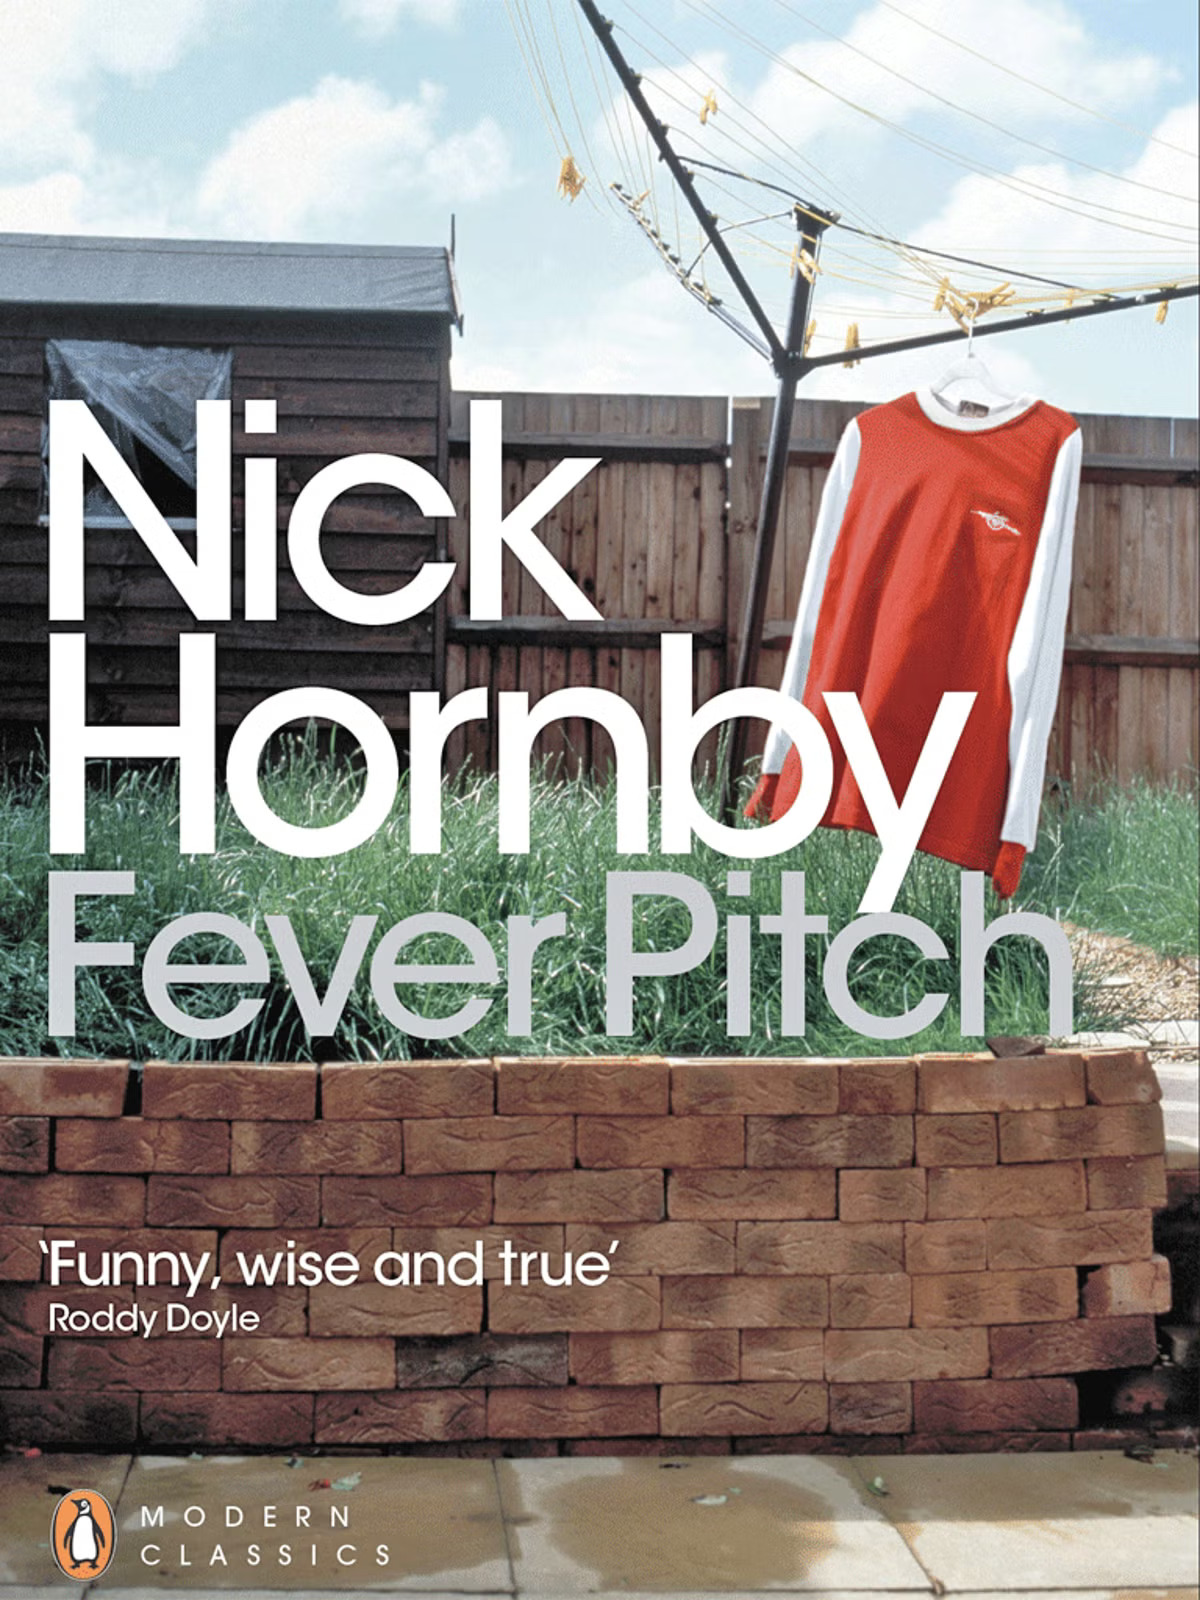 fever pitch nick hornby